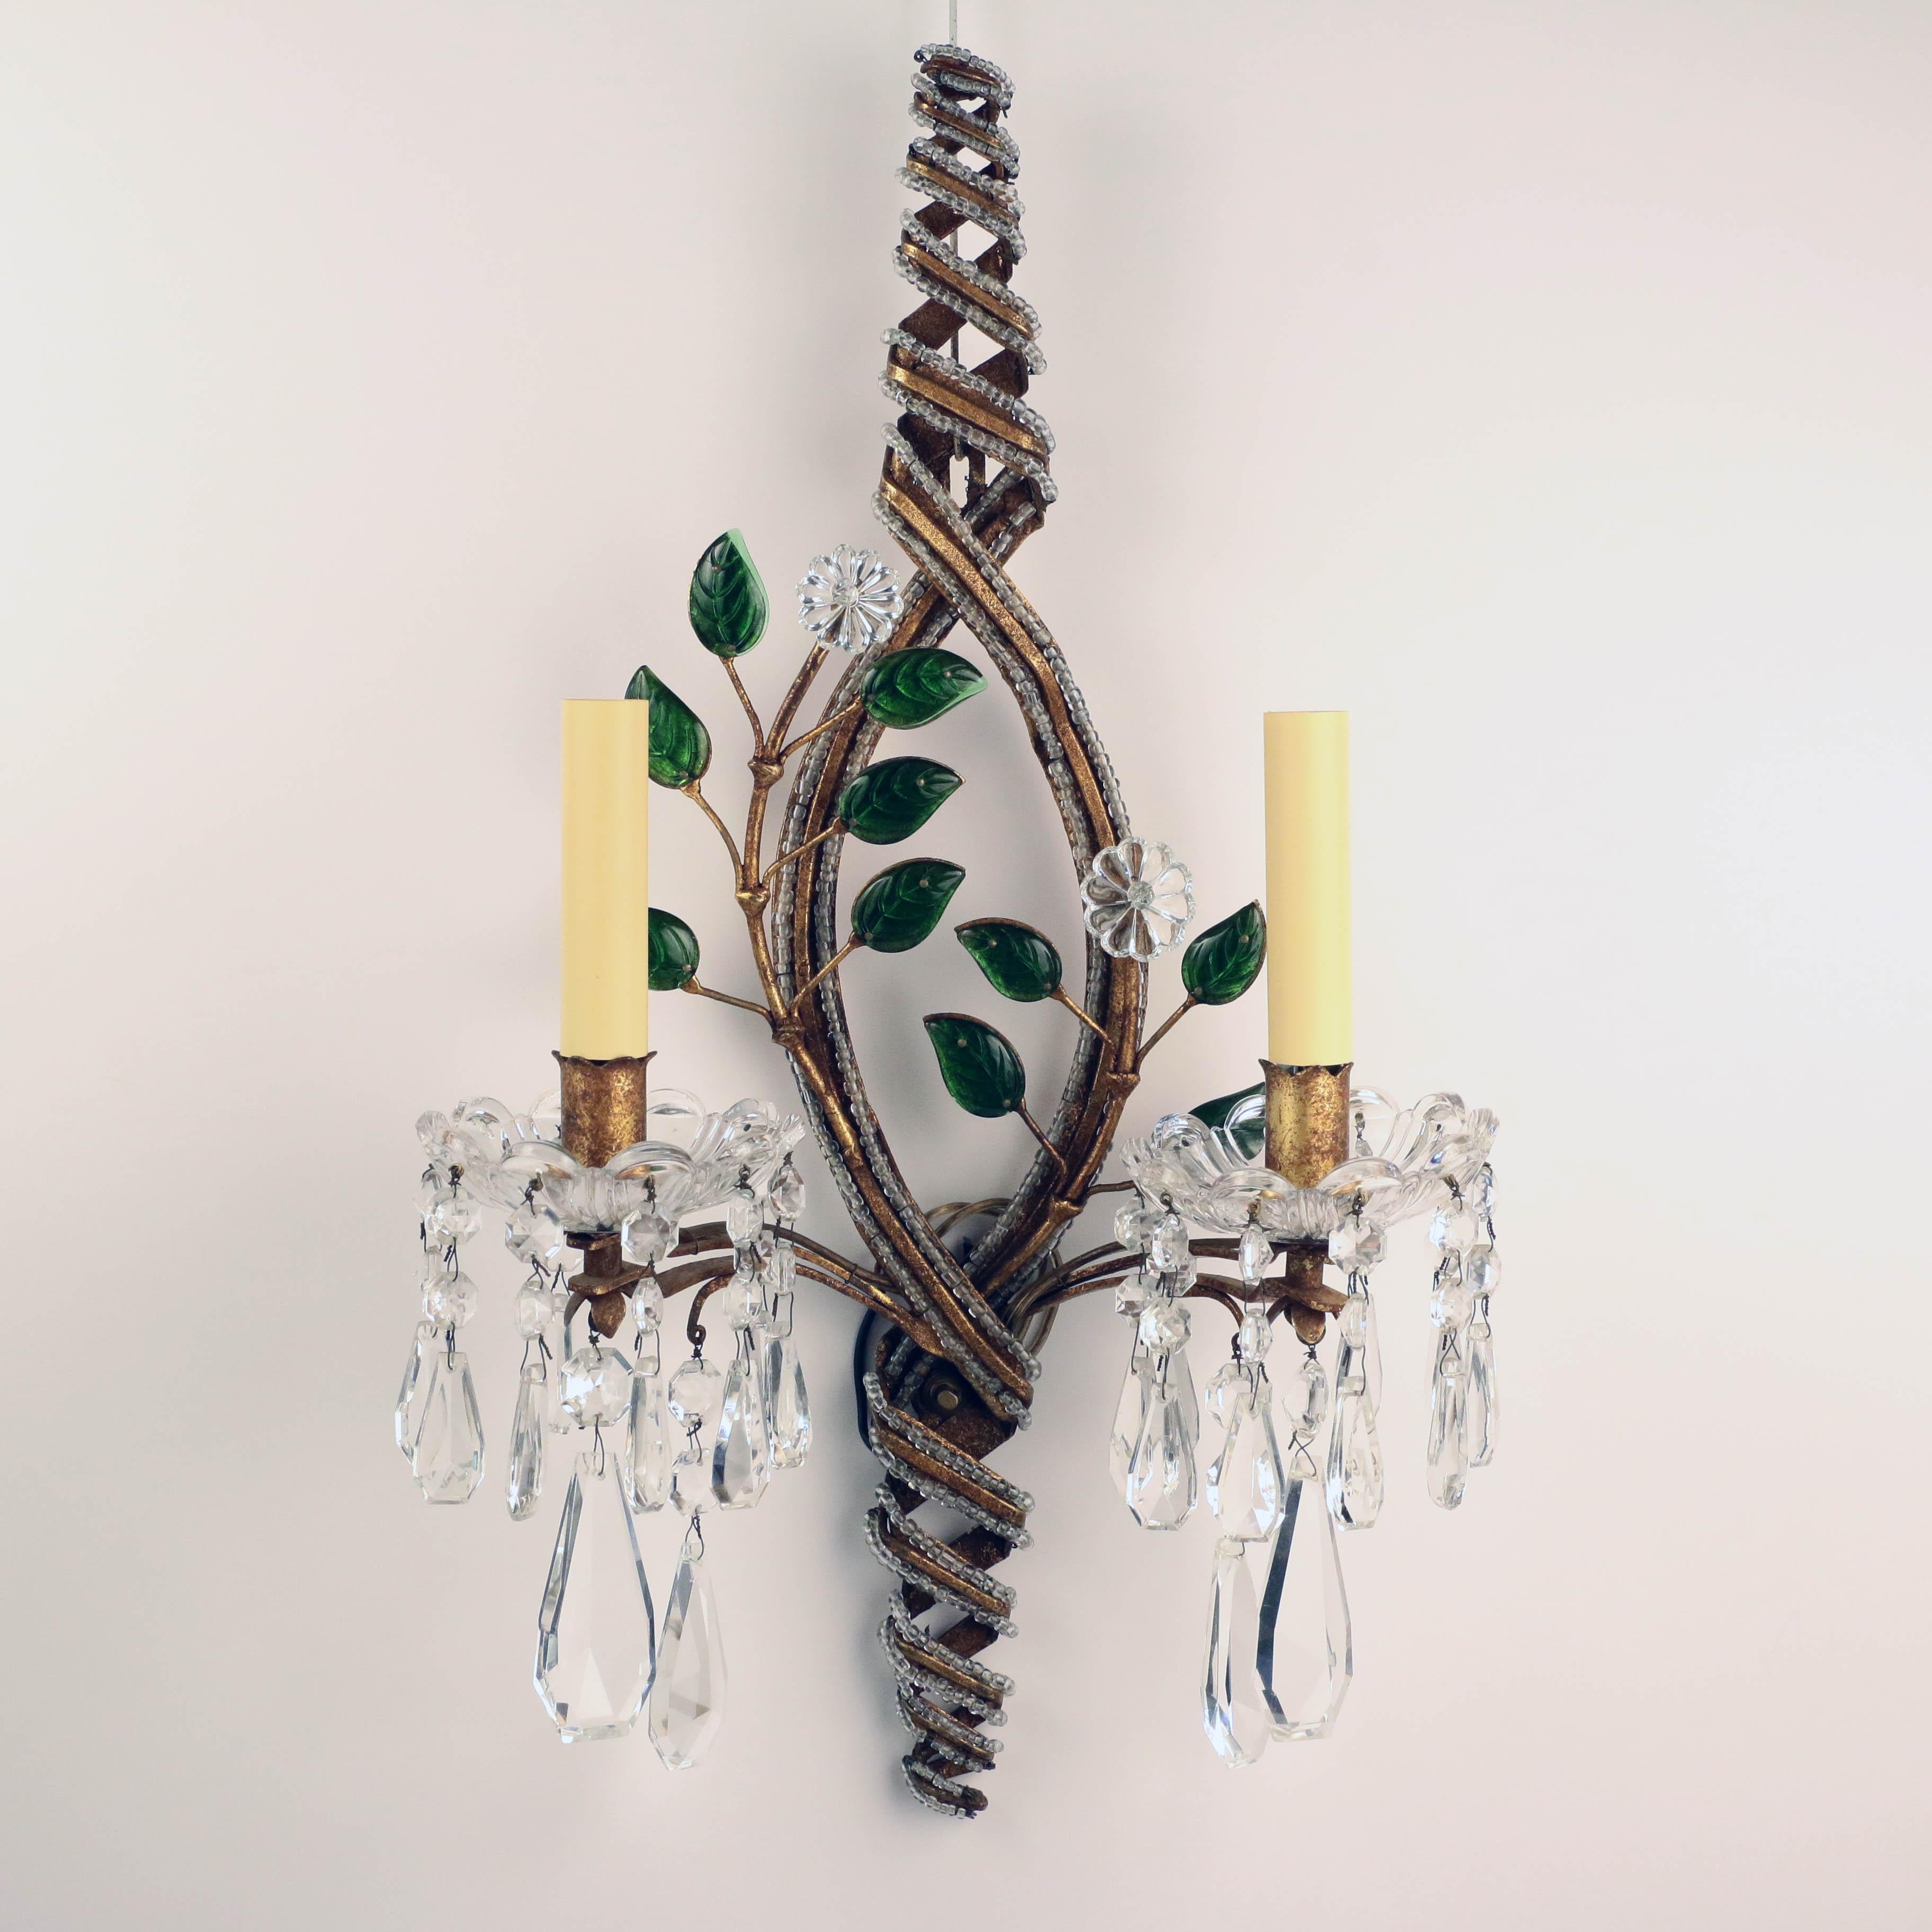 This unusual suite of wall sconces is unsigned but very much in the spirit of Baguès. Firstly, the emerald green leaves are gilt backed to give the extra sparkle. Secondly, the metal frame is Dutch gilt as is often the case with Baguès. Thirdly, the